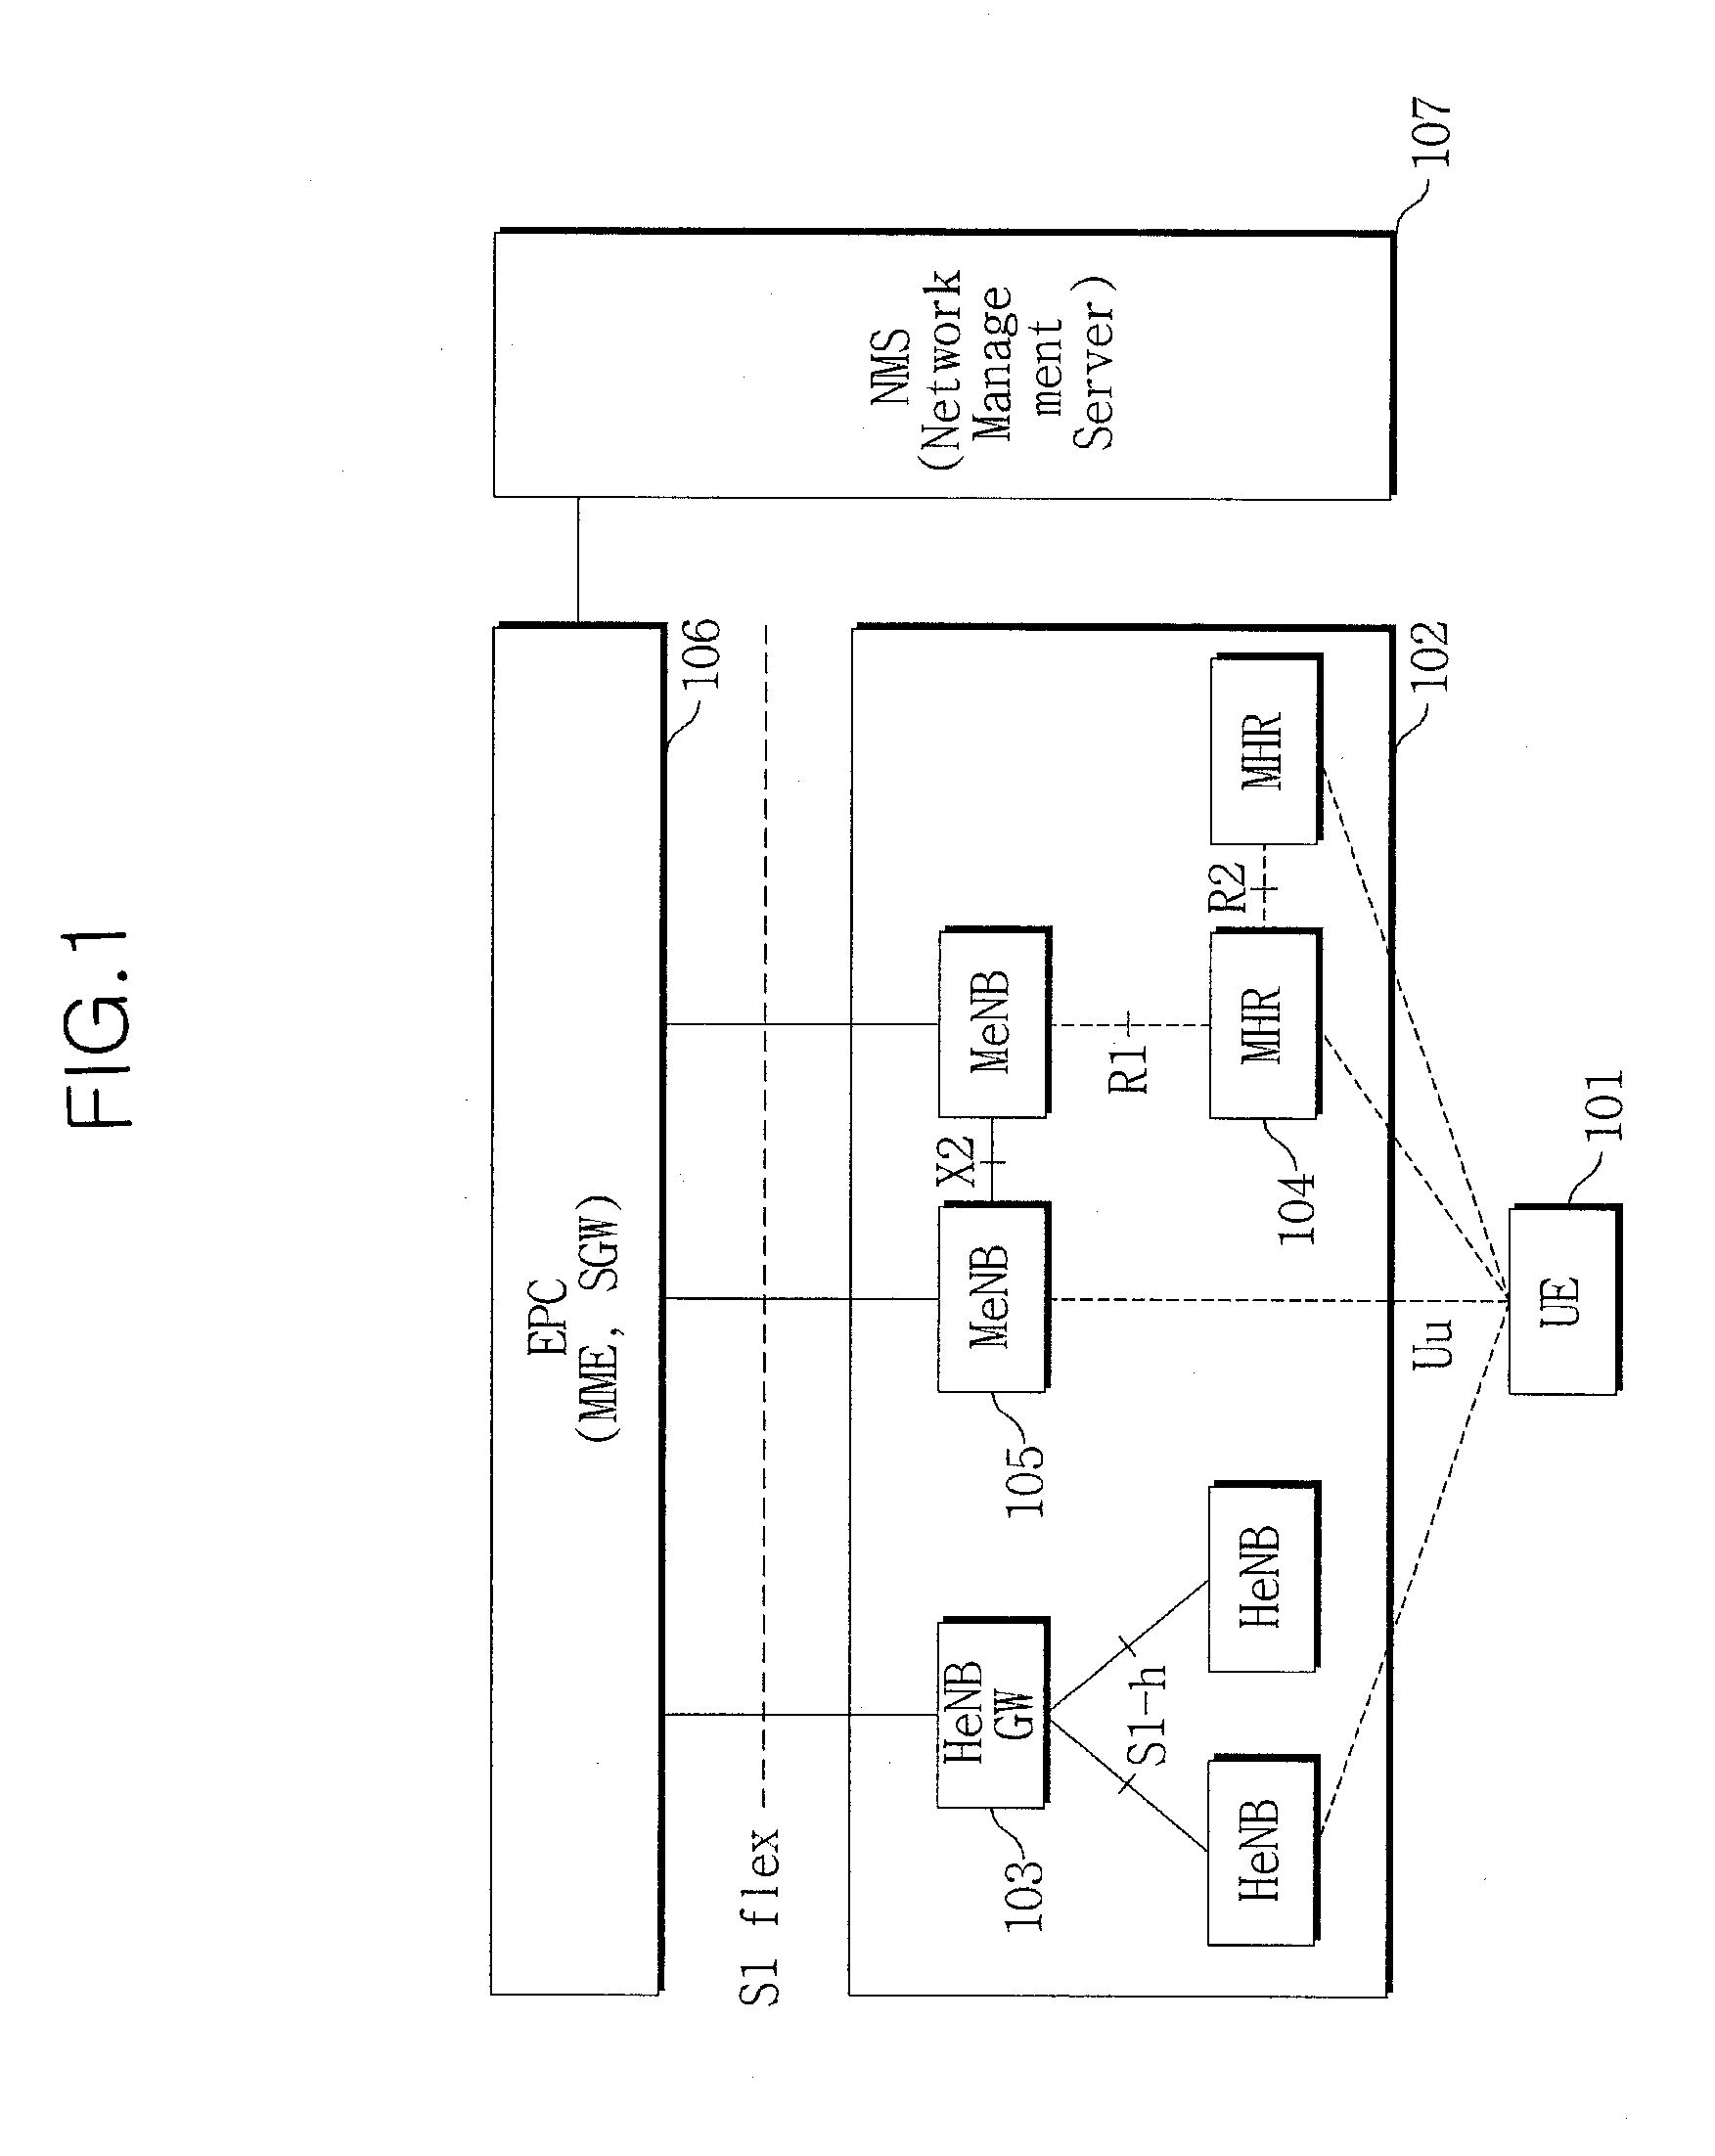 Method of operating base station with low power consumption